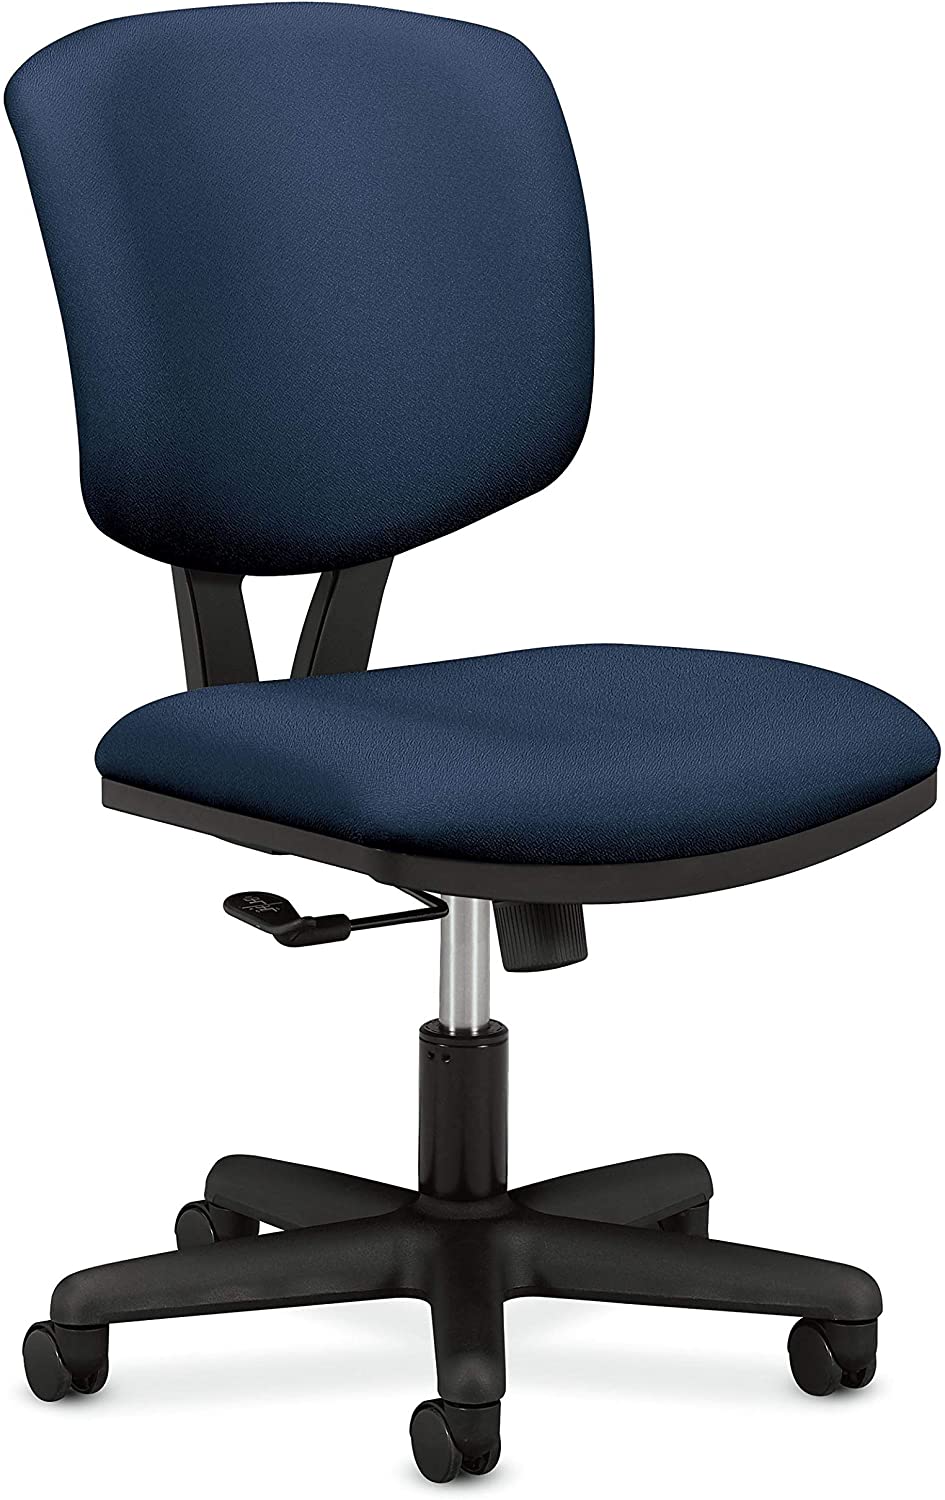 HON H5701.GA90.T Volt Low-Back Task Chair - Upholstered Computer Chair for Office Desk - Navy Fabric (H701)